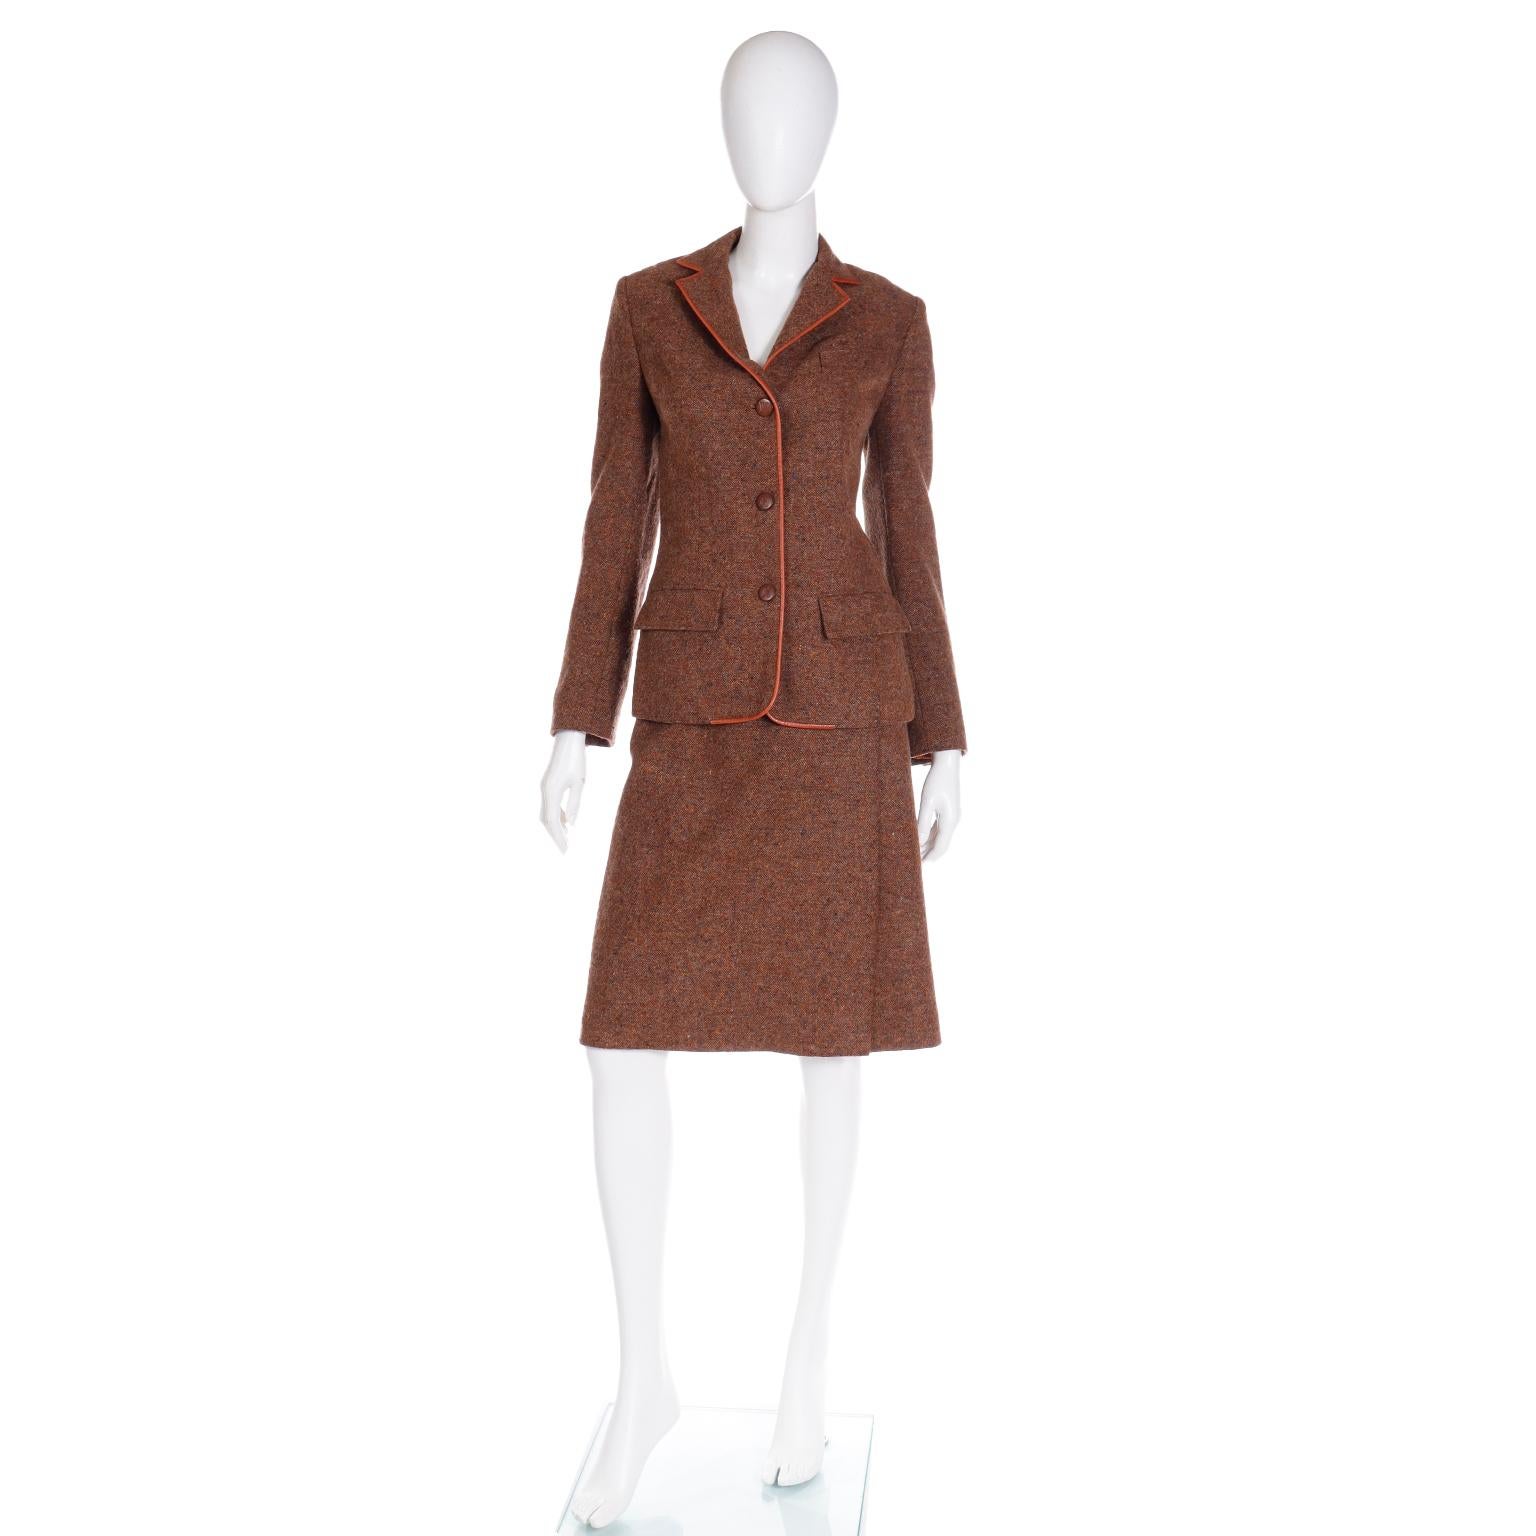 This is a vintage 1970s Hermes brown wool tweed jacket & skirt suit with lovely leather trim.	This outfit is reminiscent of Hermes original equestrian style and it is so beautifully made. We love vintage Hermes clothing, especially the wool and